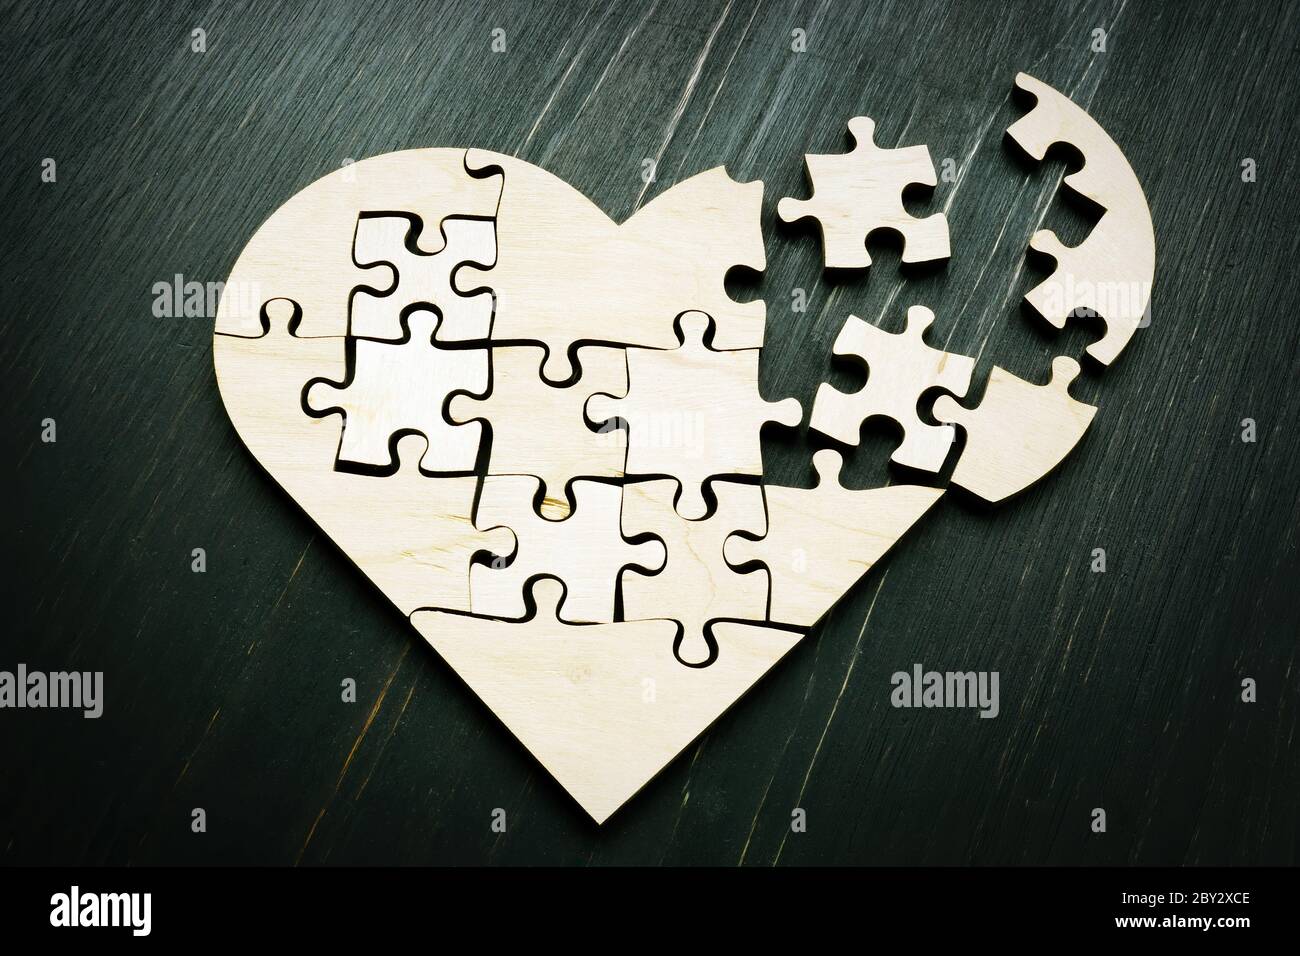 Heart from a broken puzzle with pieces. Symbol of divorce cardiovascular disease. Stock Photo